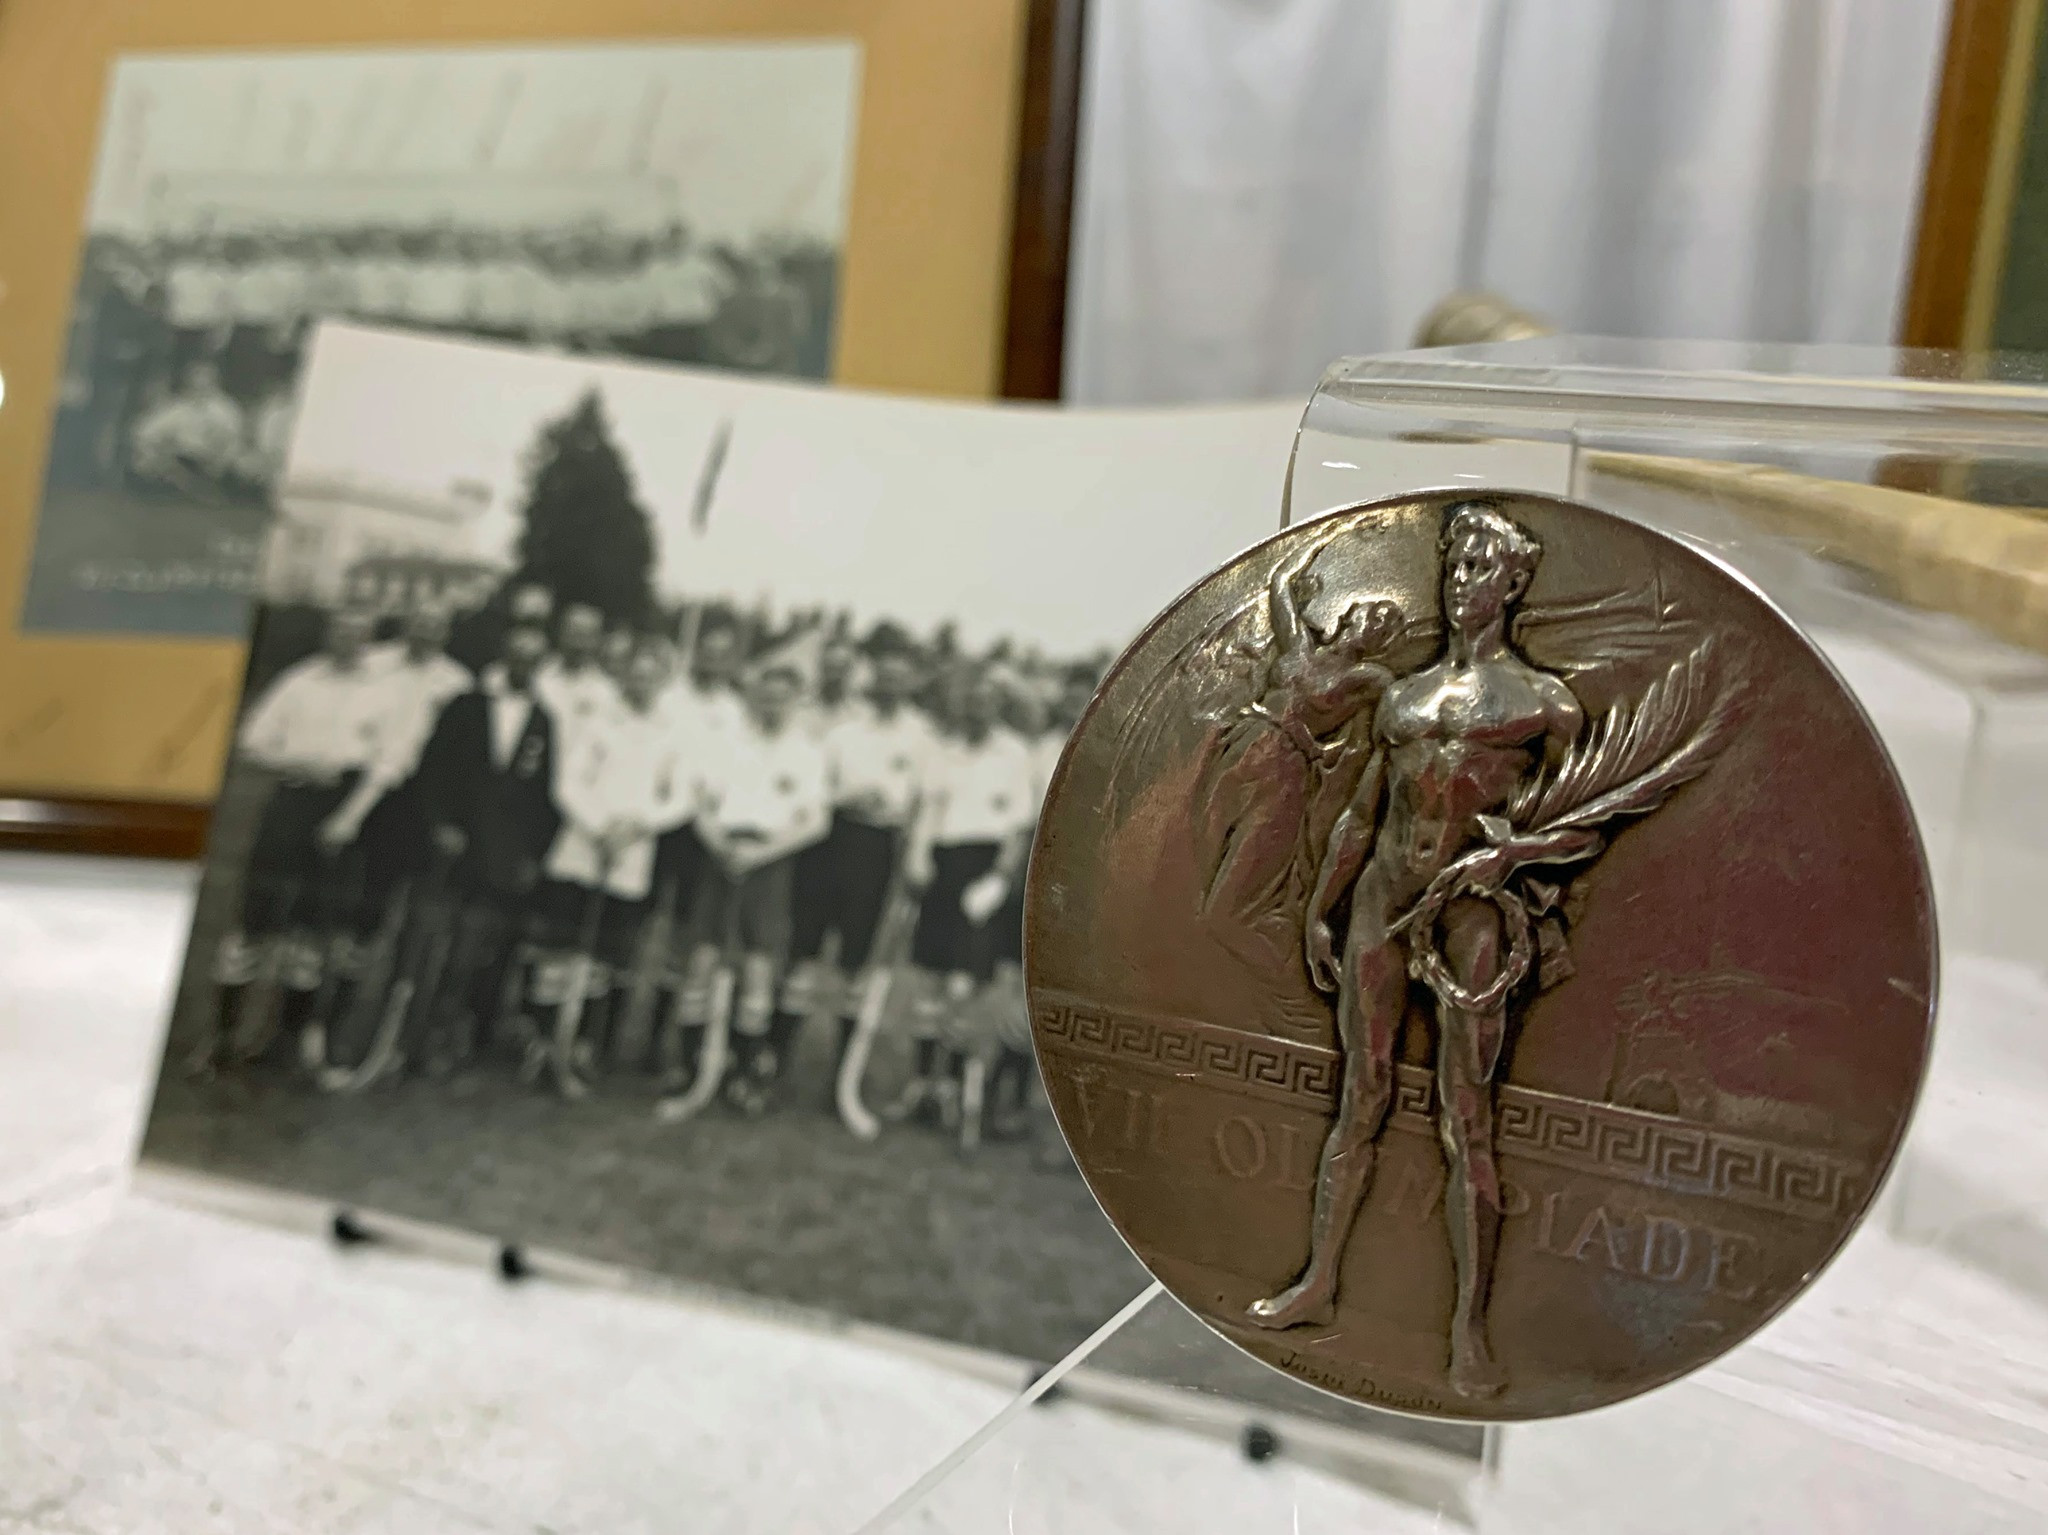 An Olympic gold medal won by Britain's Harry Haslam at Antwerp 1920 has been loaned to The Hockey Museum ©The Hockey Museum